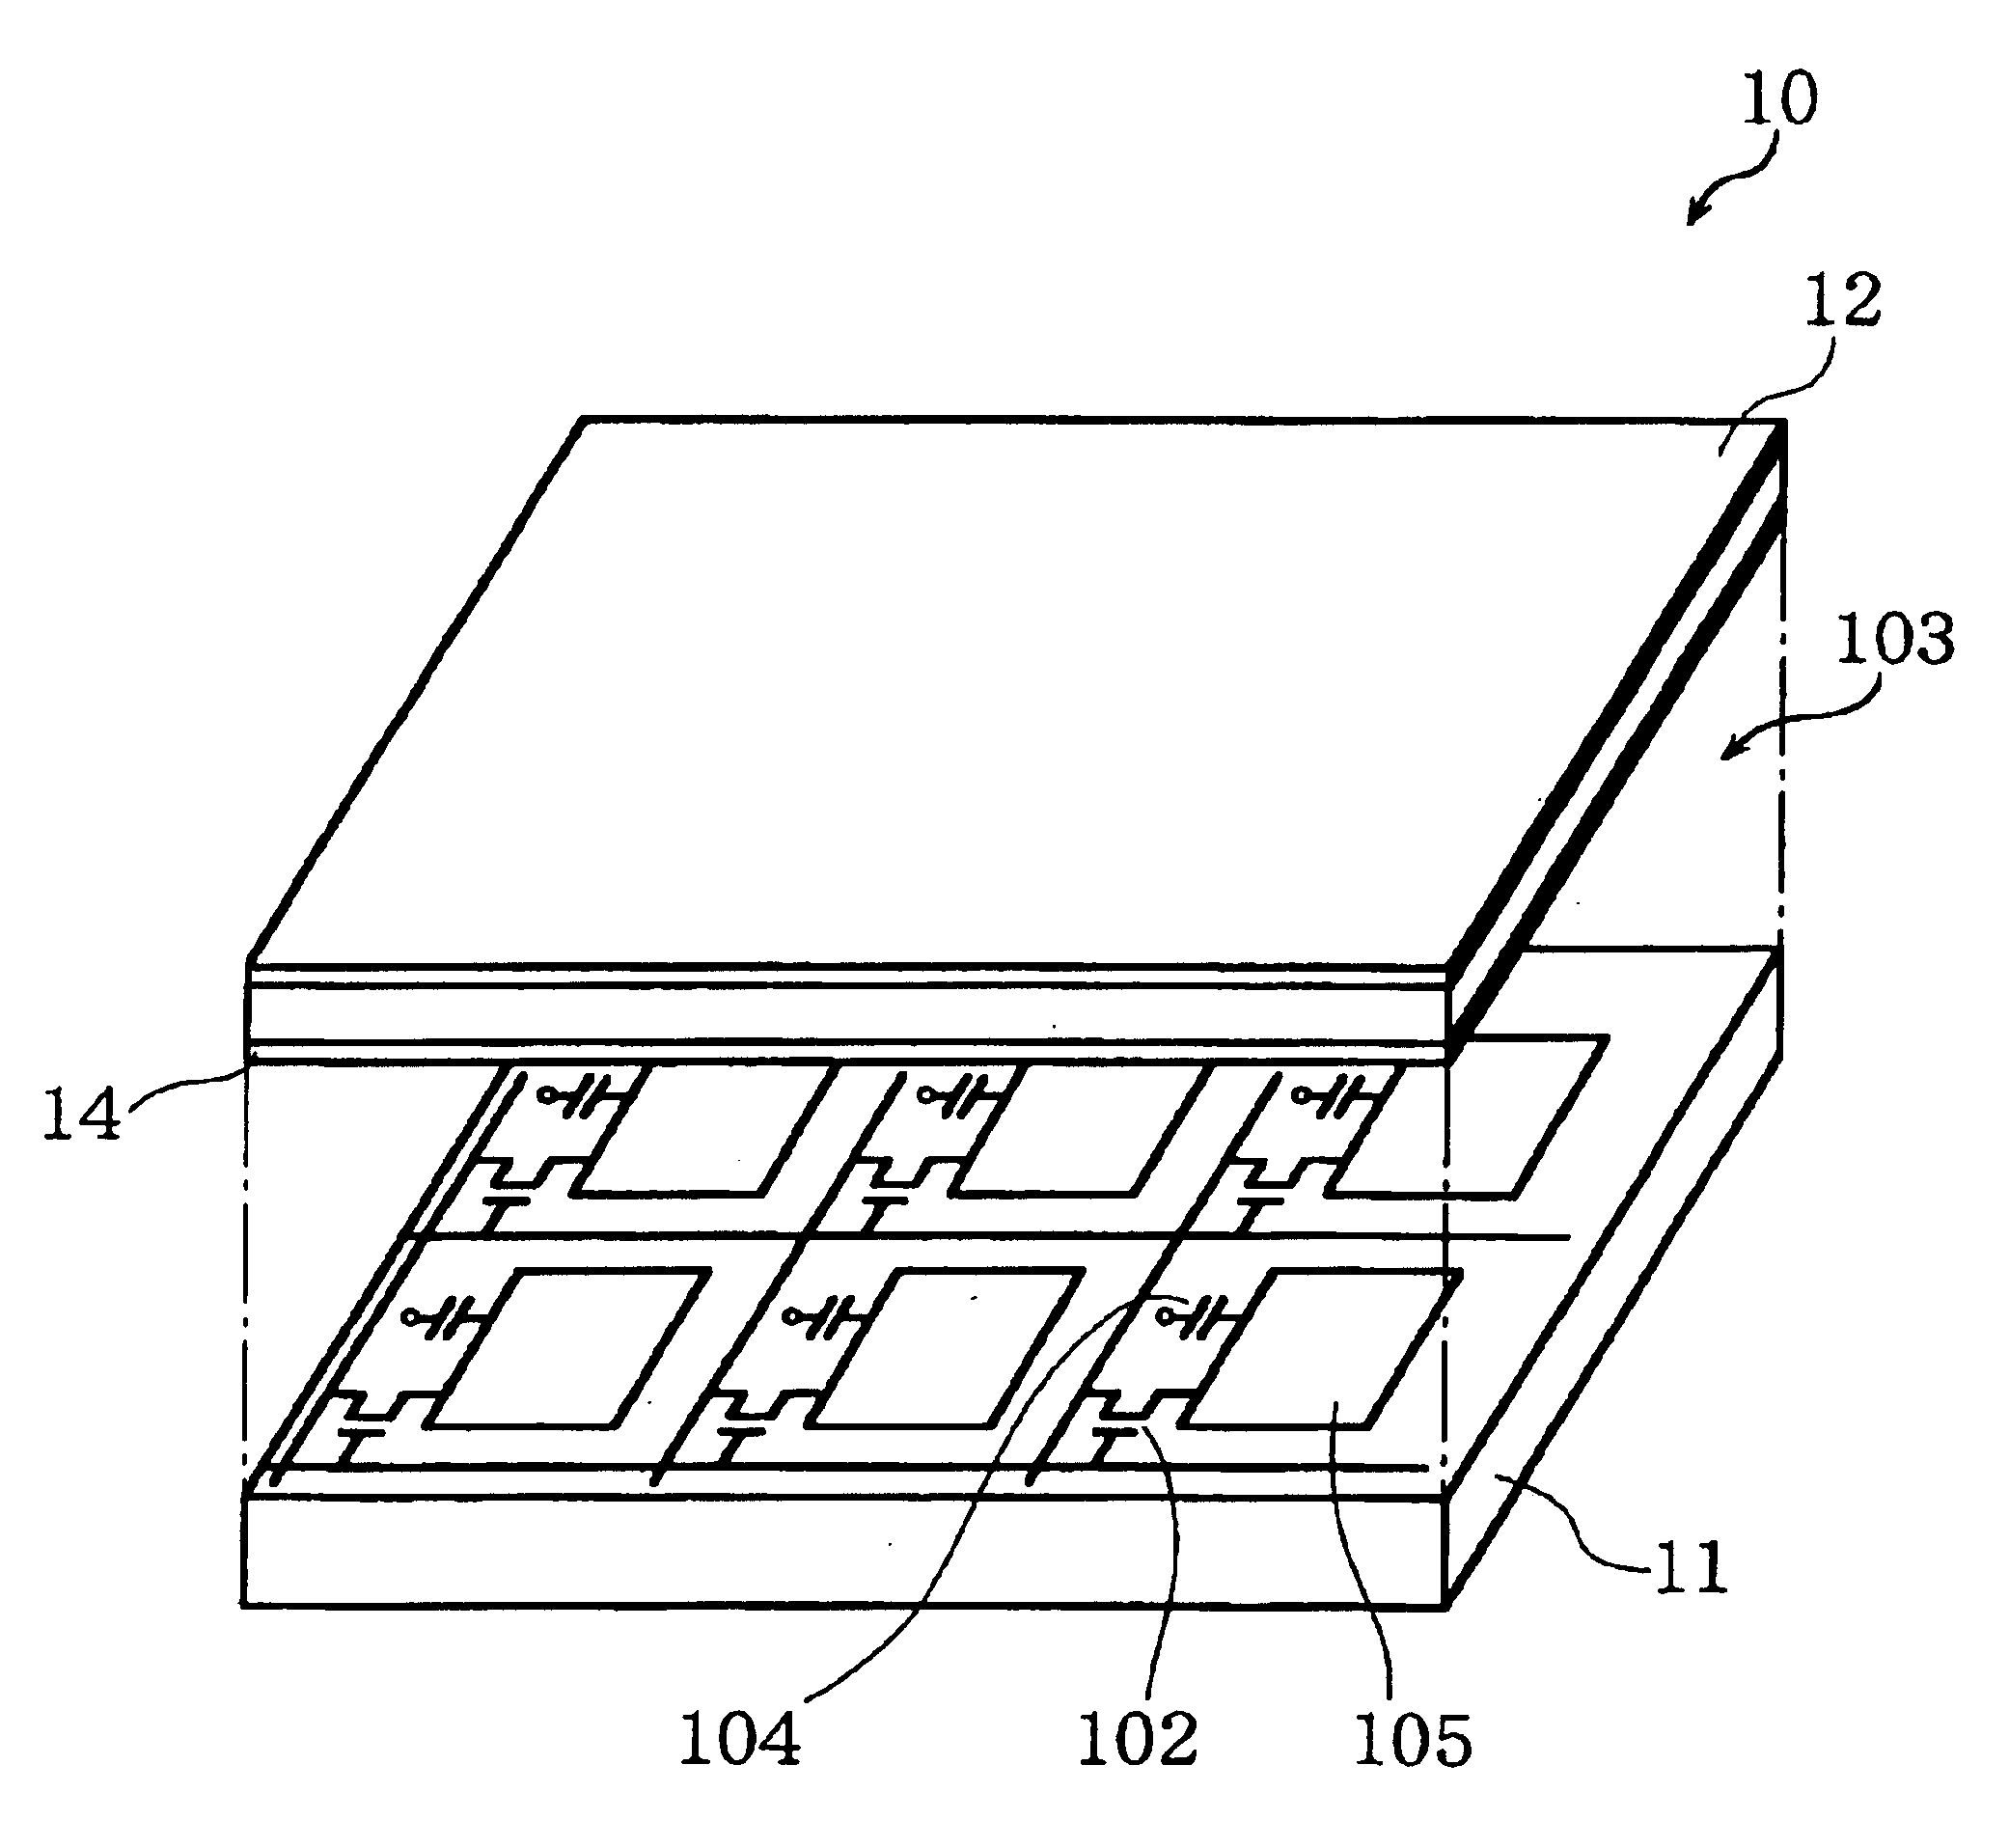 Active matrix display device and method of driving the same